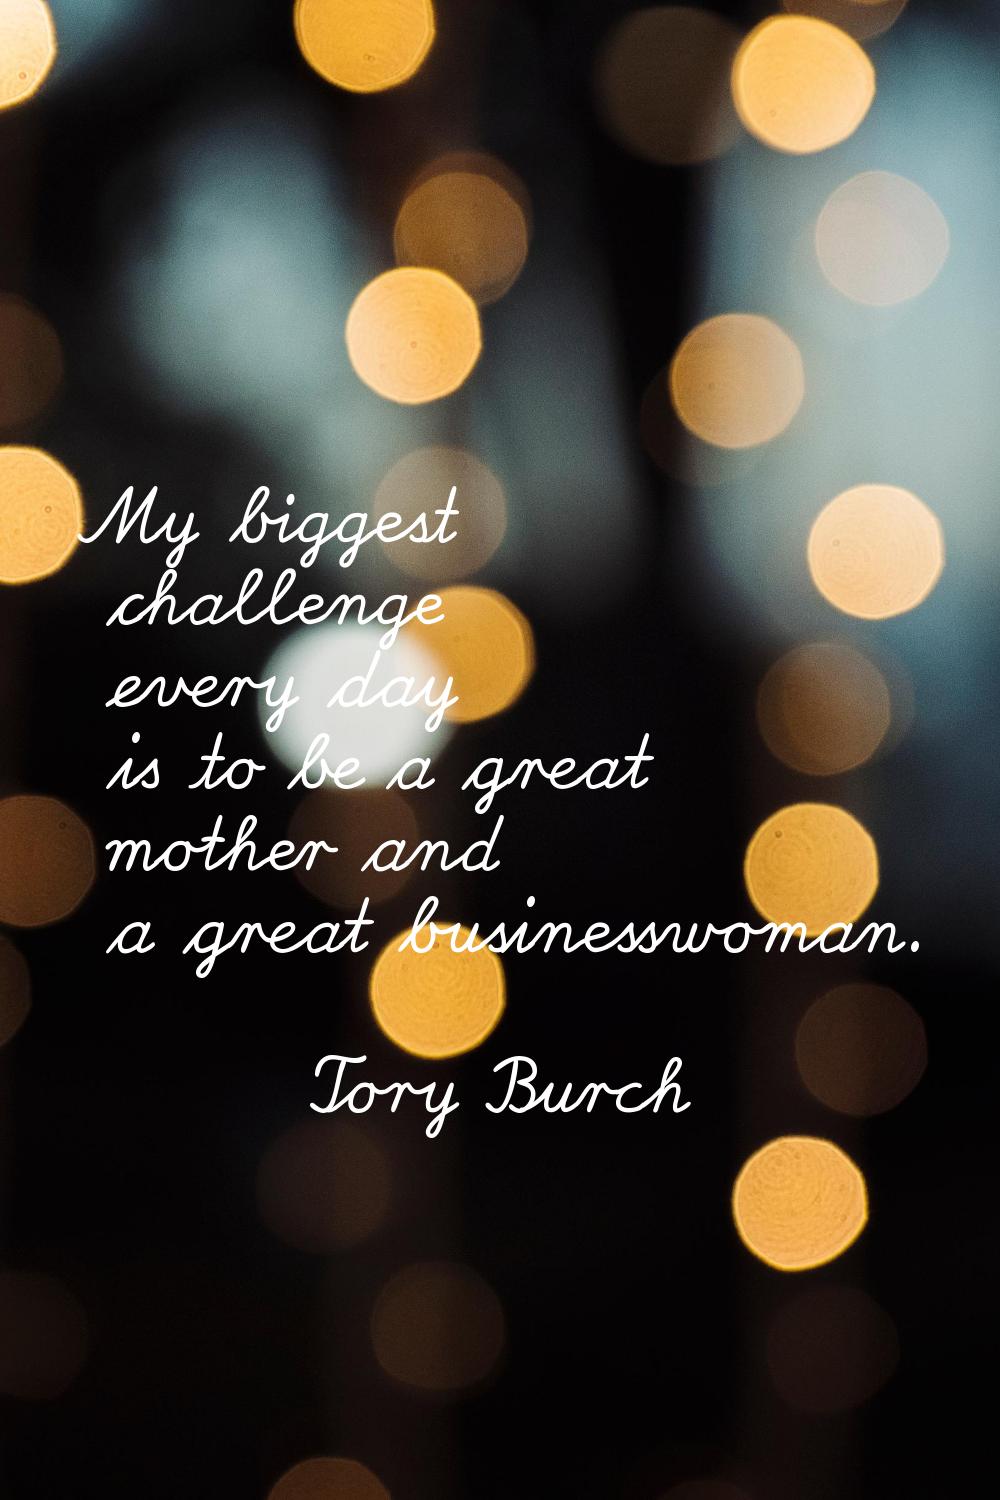 My biggest challenge every day is to be a great mother and a great businesswoman.